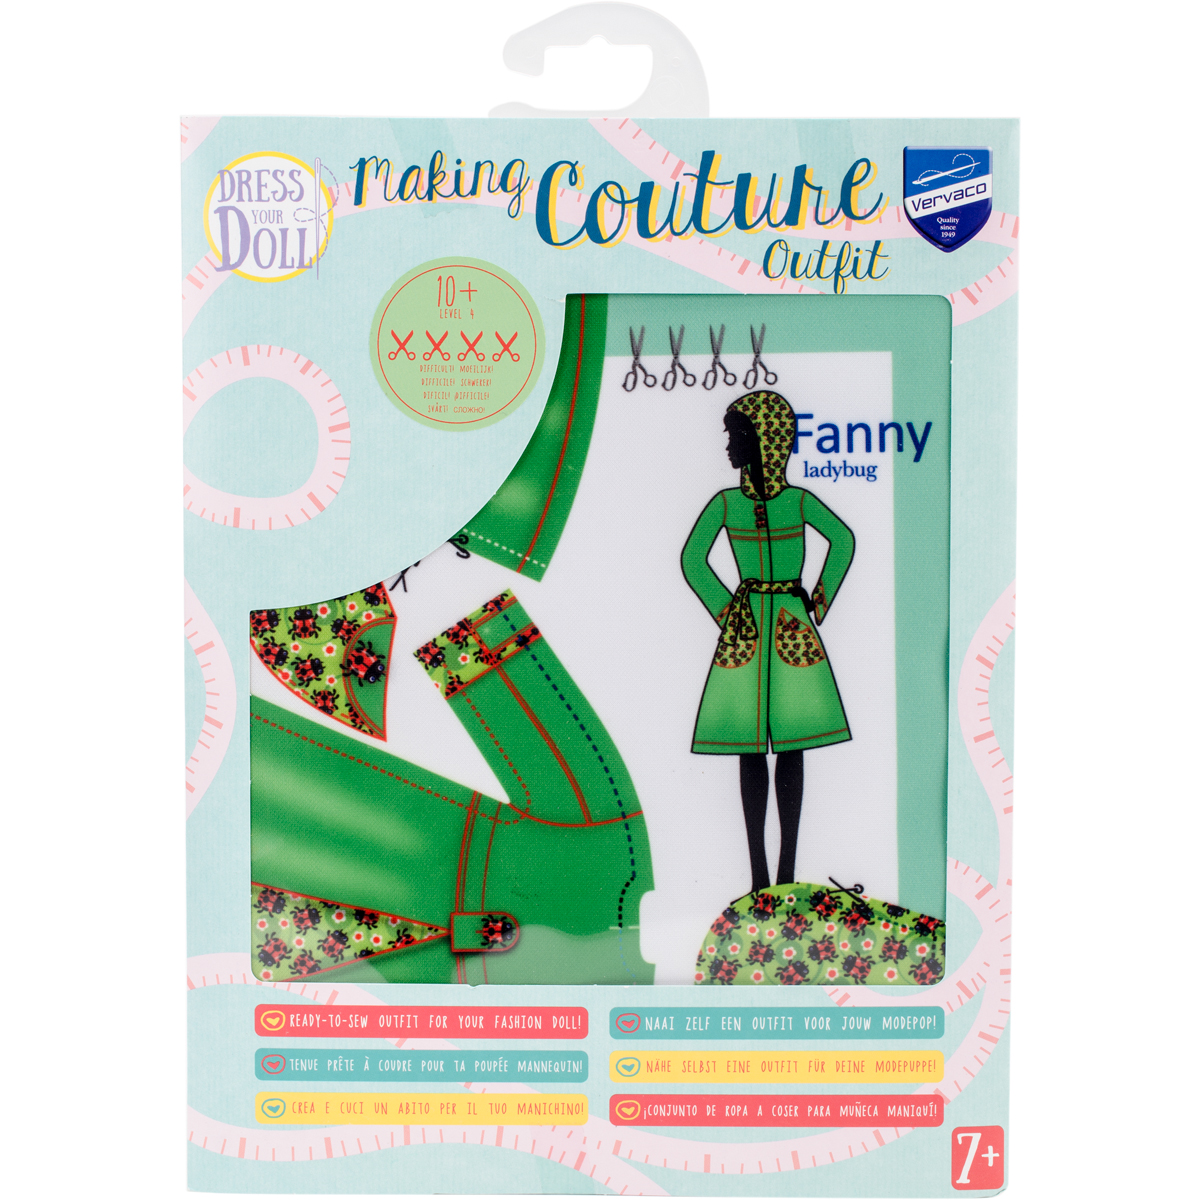 V0164666 Dress Your Doll Making Couture Outfit Set - Fanny Ladybug